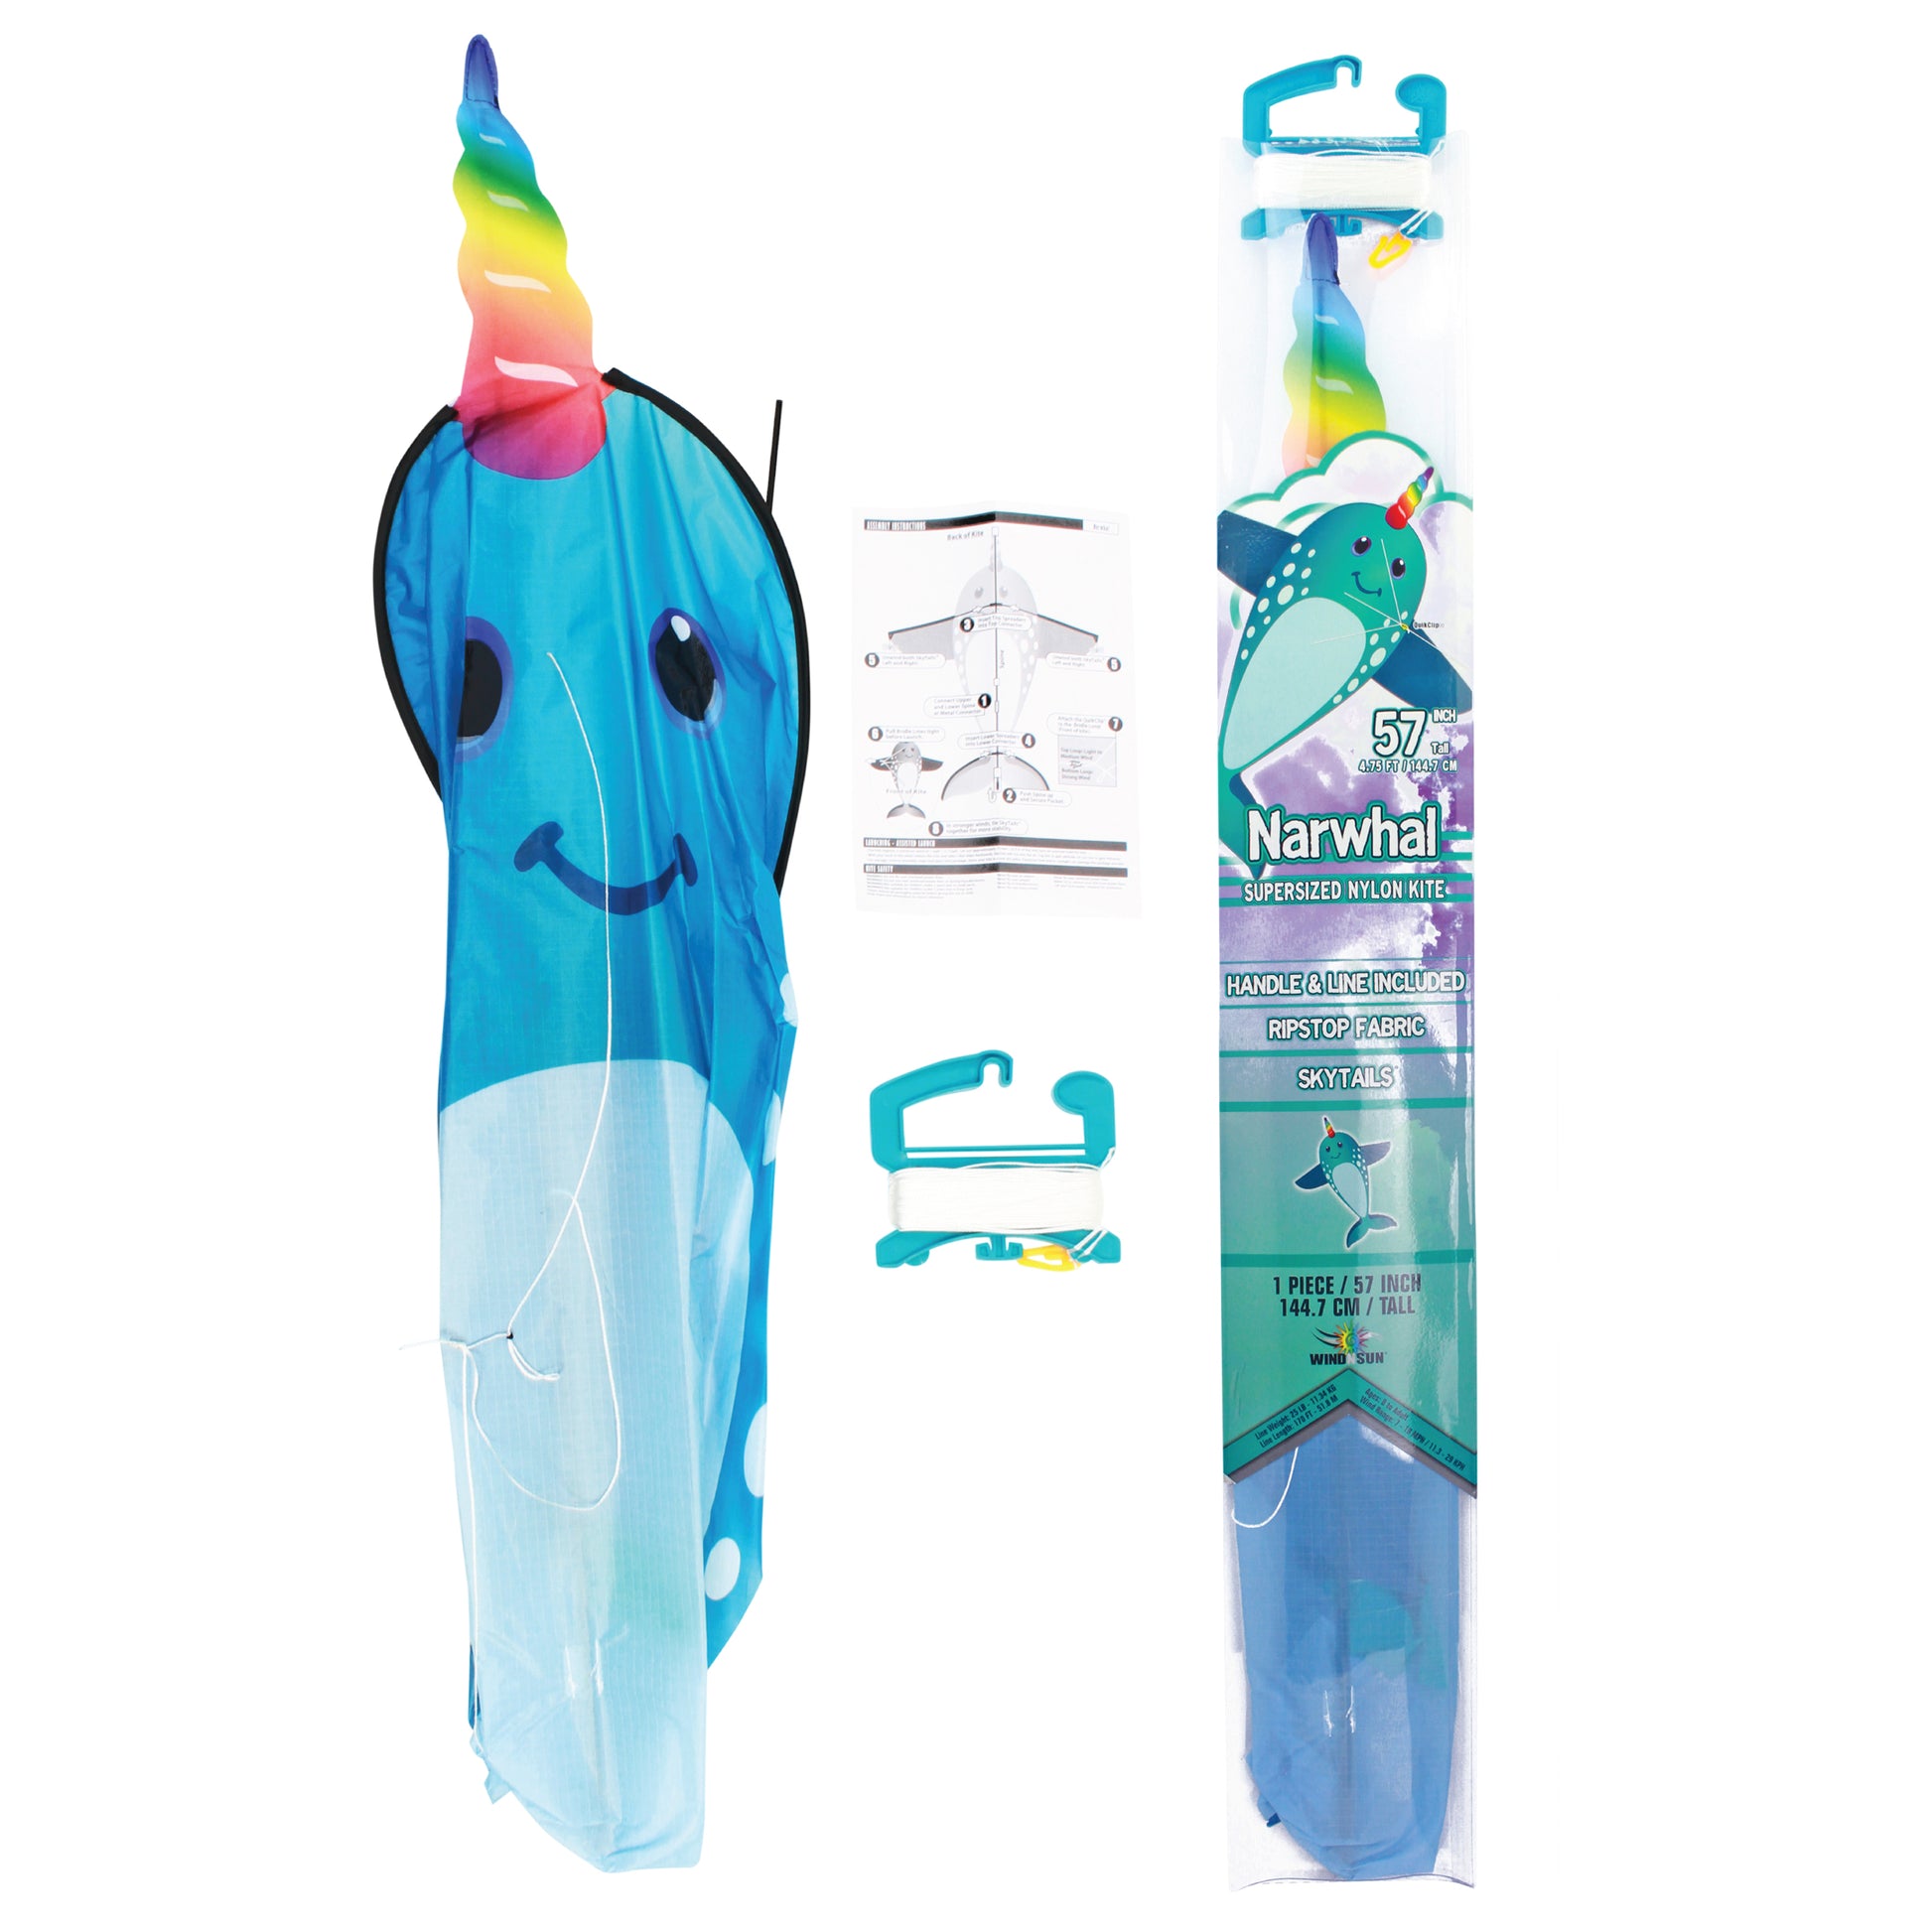 WindNSun SuperSize 2-D Narwhal Ripstop Nylon Figure Kite  Product Packaging